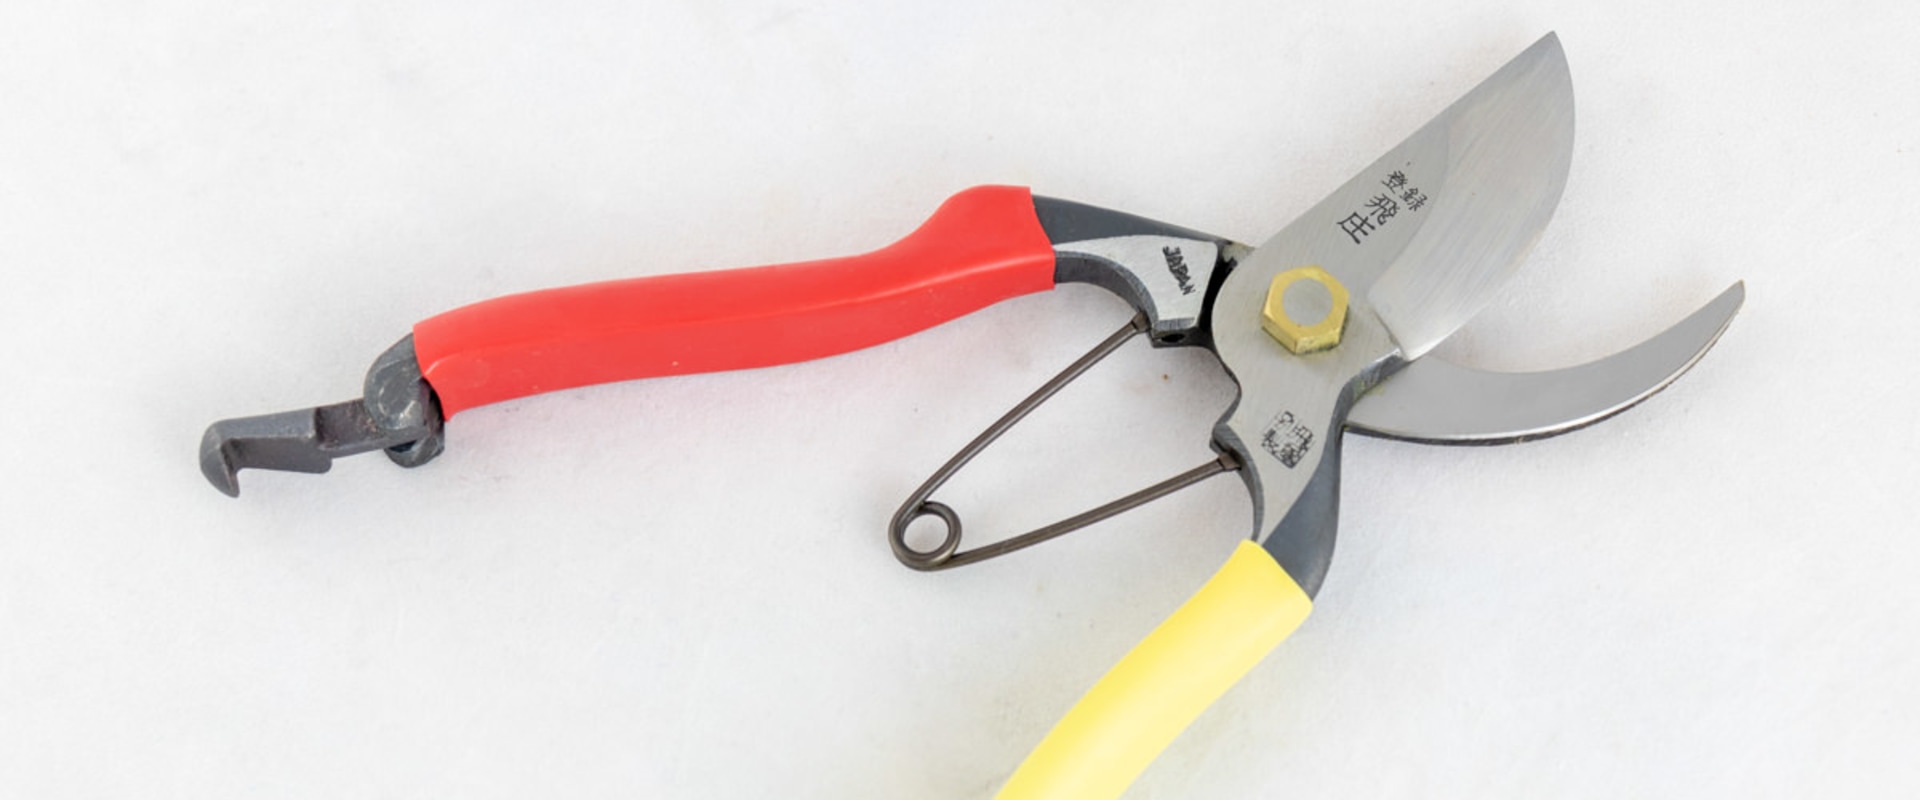 Pruners and Shears: An Overview